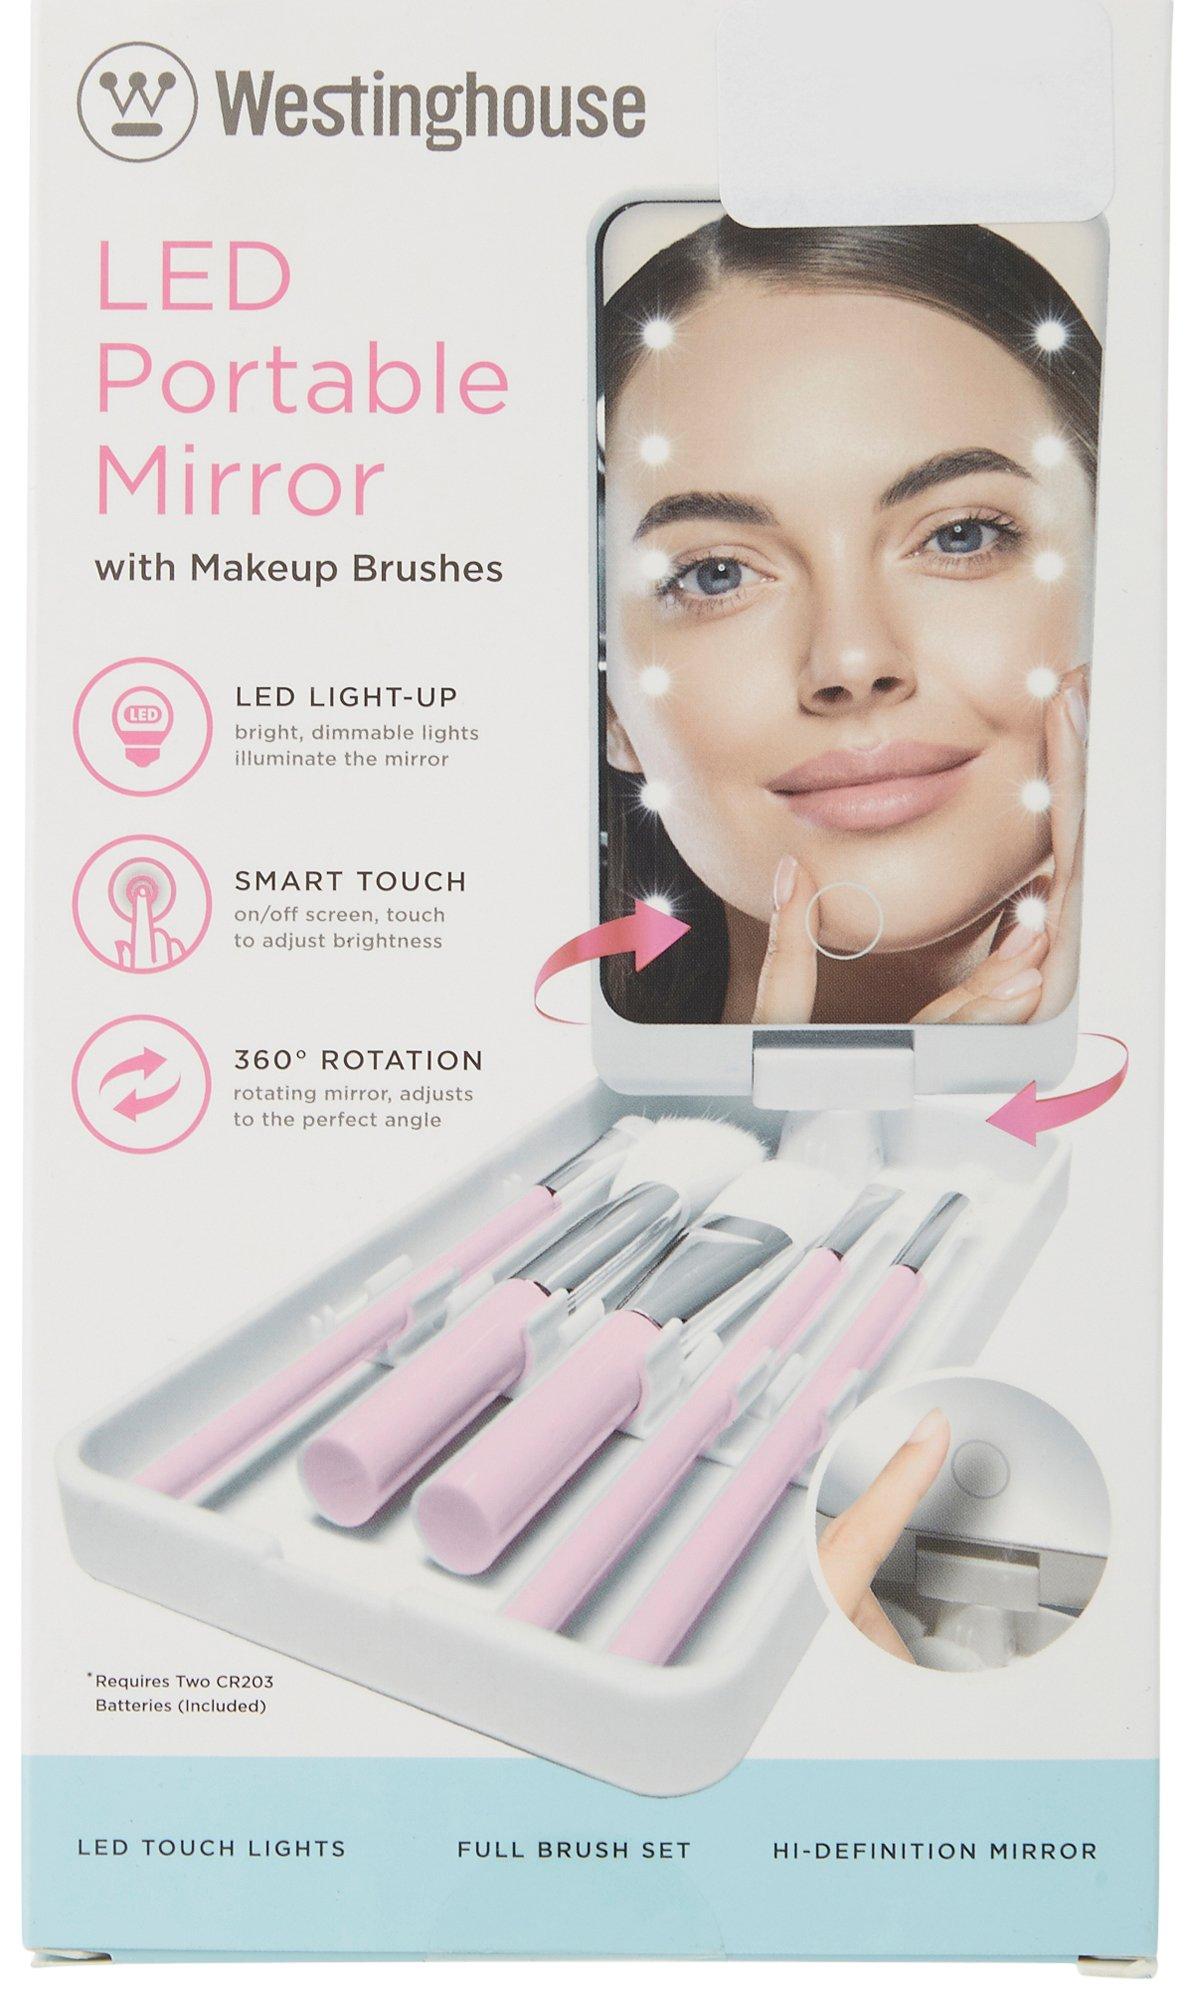 LED Portable Mirror With Makeup Brushes